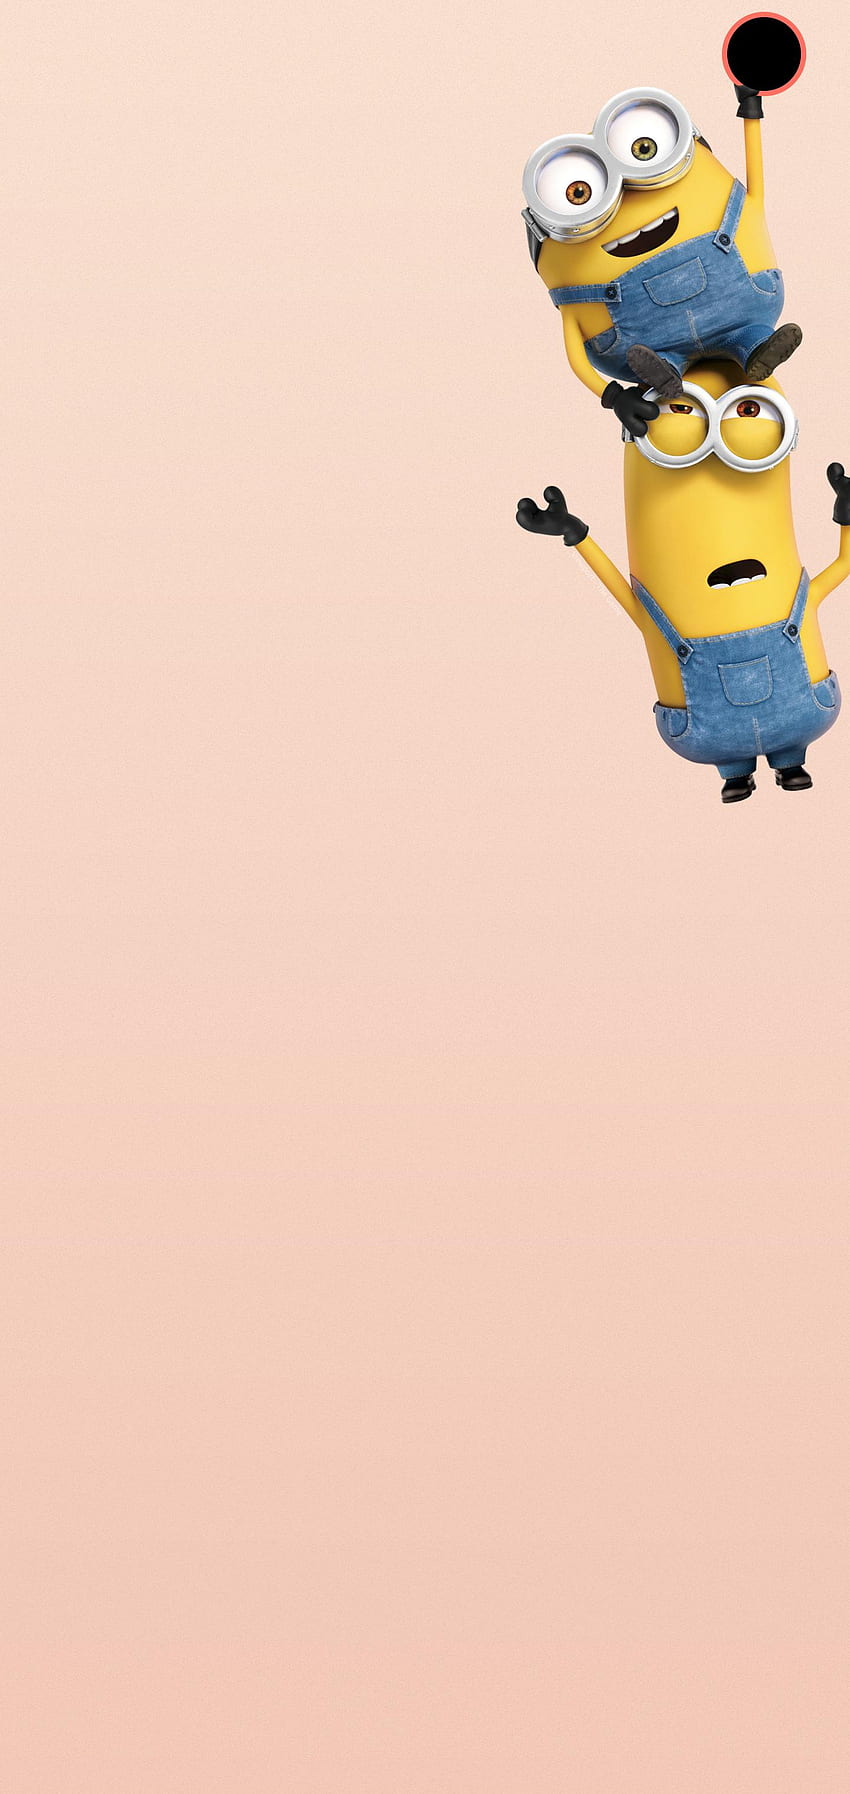 Minion of Despicable Me Hanging On oleh BlackBindy Galaxy S10 Hole wallpaper ponsel HD